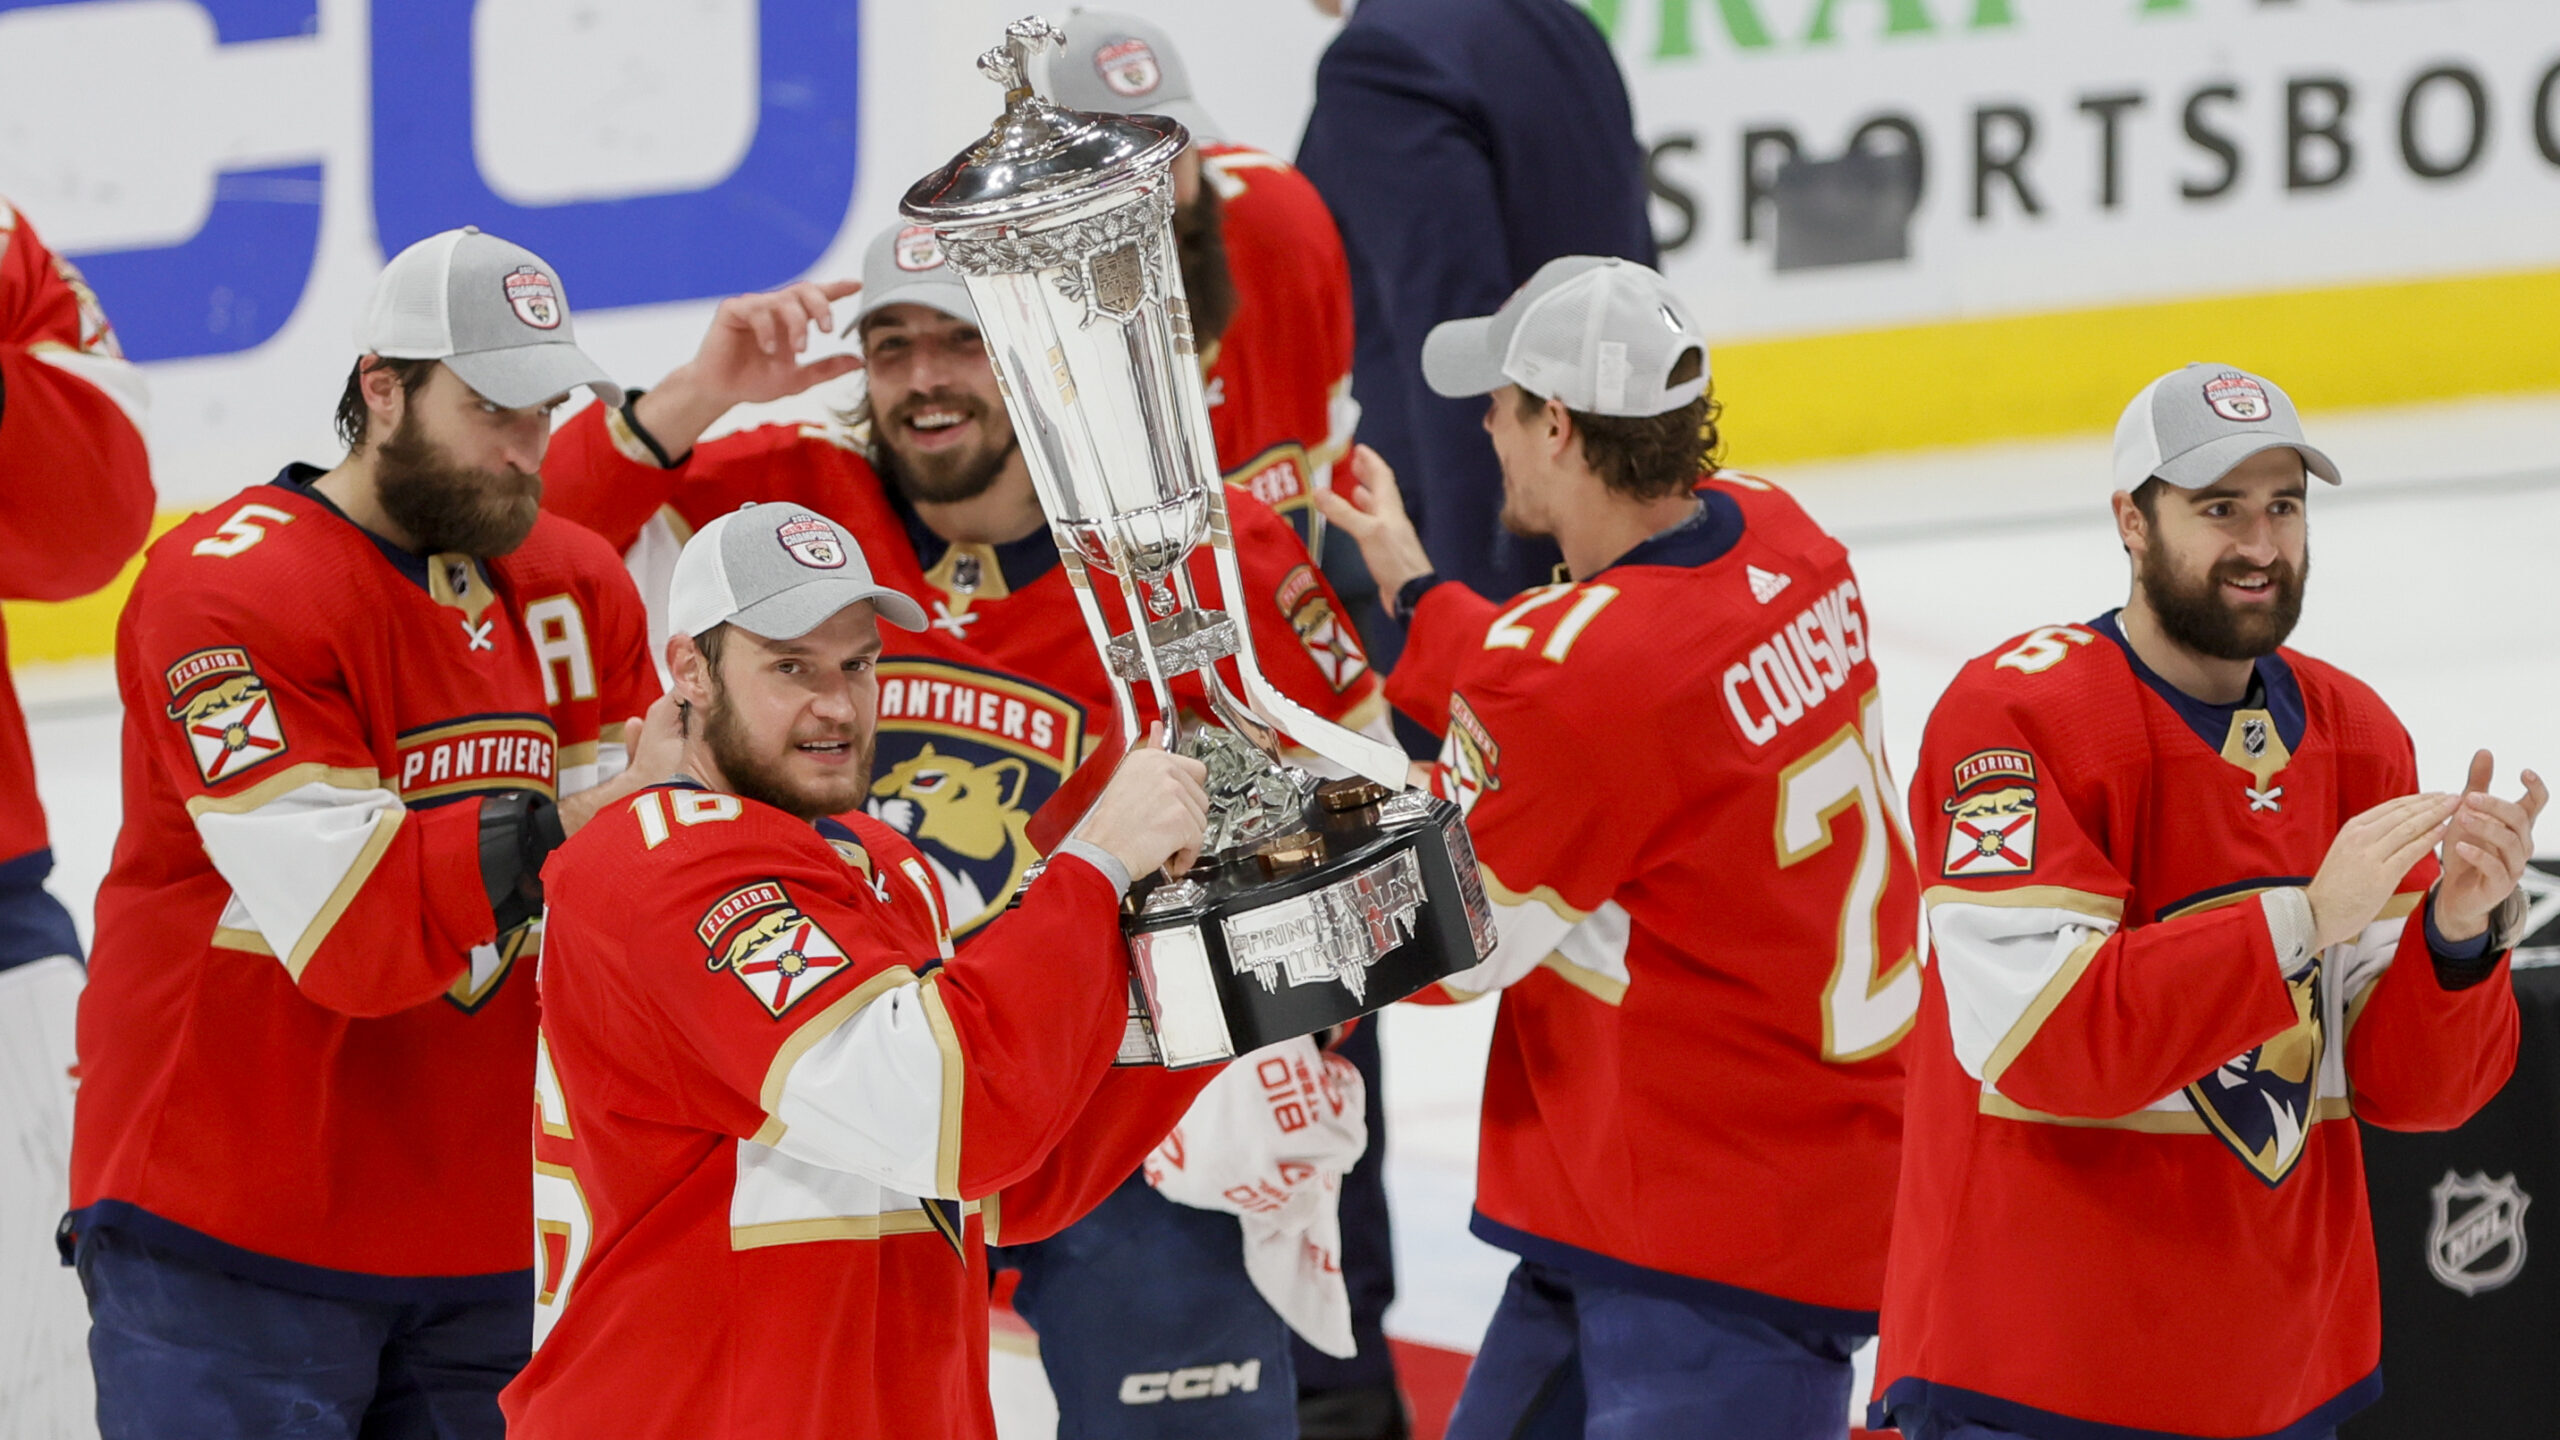 Nhl Stanley Cup Odds Power Rankings Panthers Top 3 Remaining Teams 